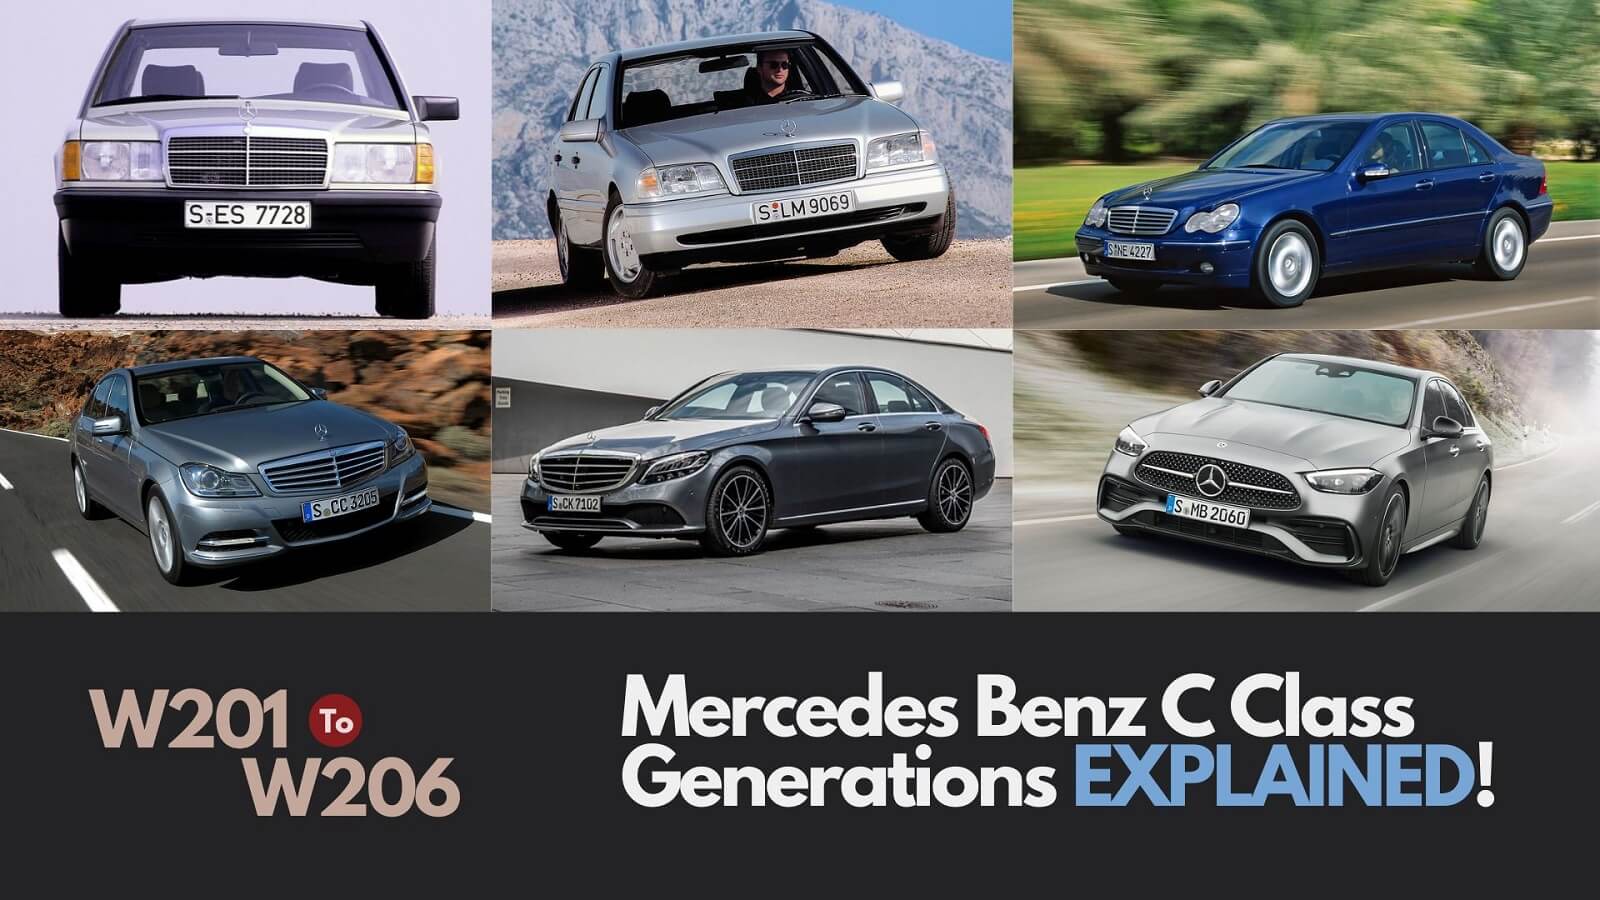 Mercedes Benz C Class generations and history (w201 to w206)